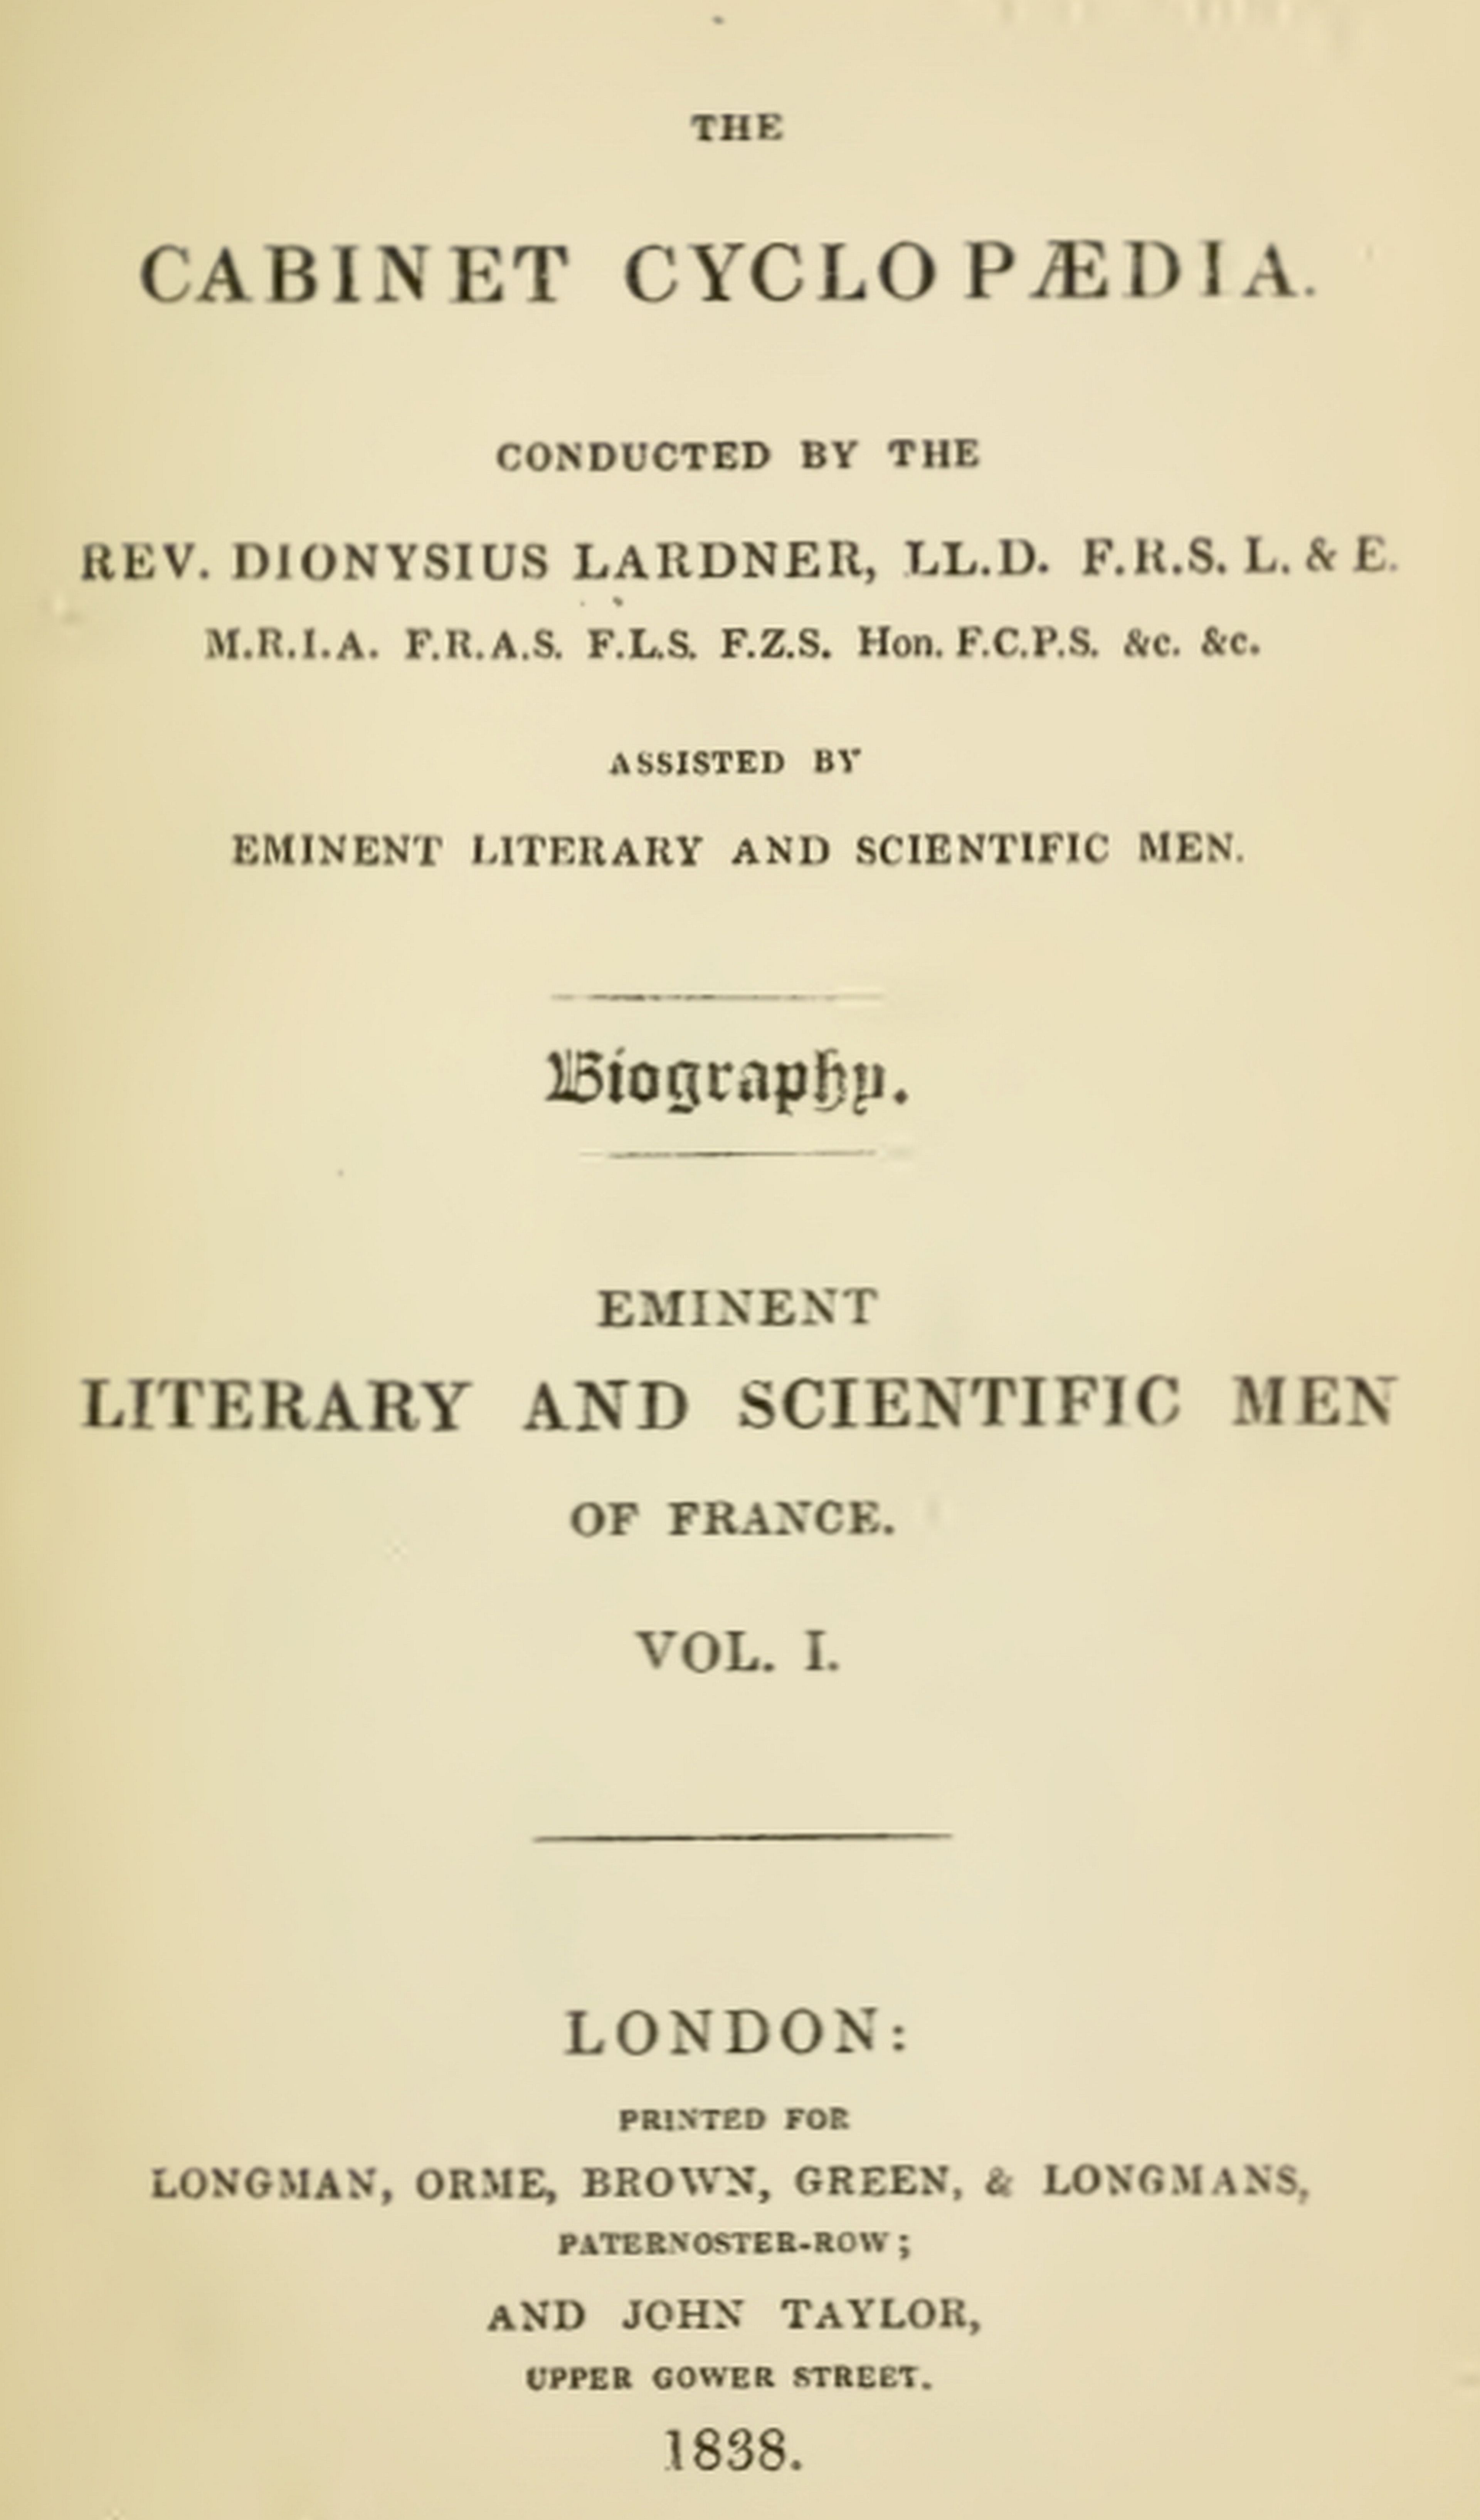 The Project Gutenberg eBook of Lives of the most eminent literary and  scientific men of France, Vol. 1 (of 2), by Mary Shelley.